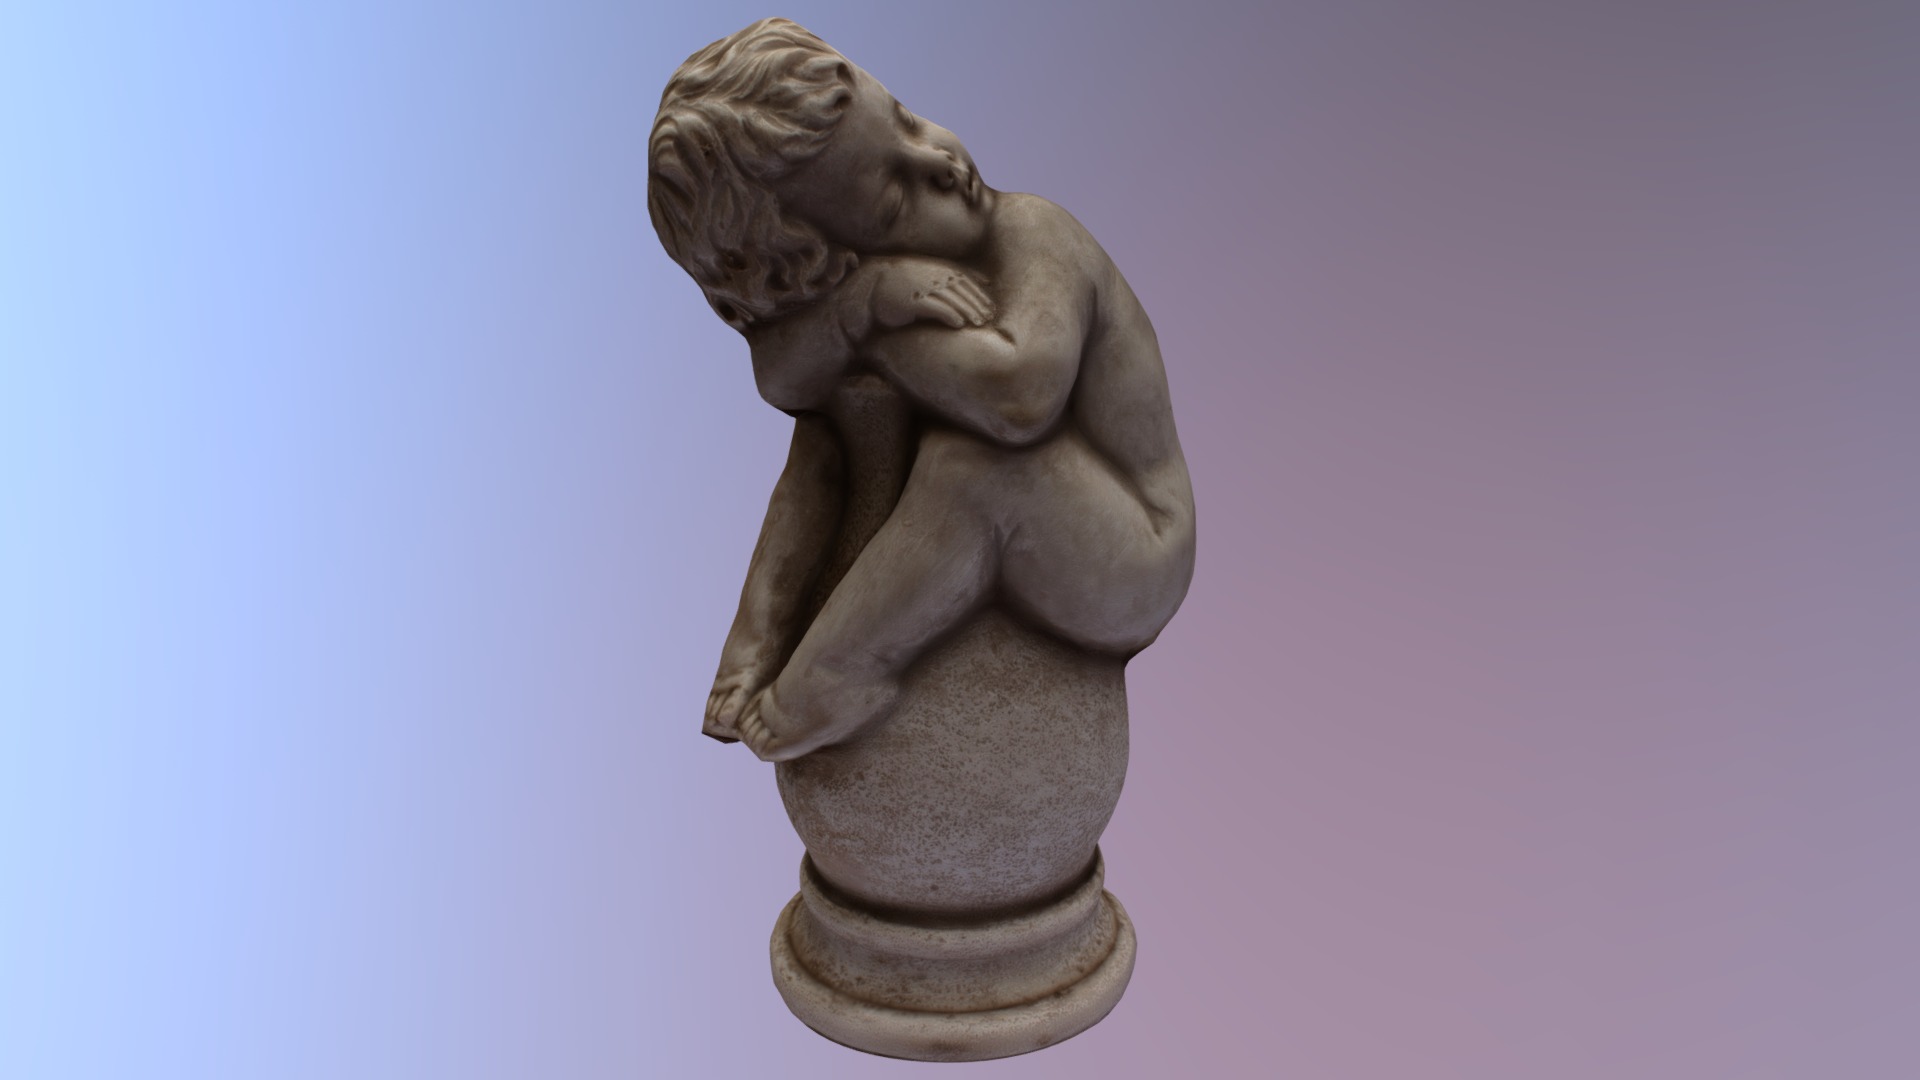 3D model Baby statue - This is a 3D model of the Baby statue. The 3D model is about a statue of a naked baby.